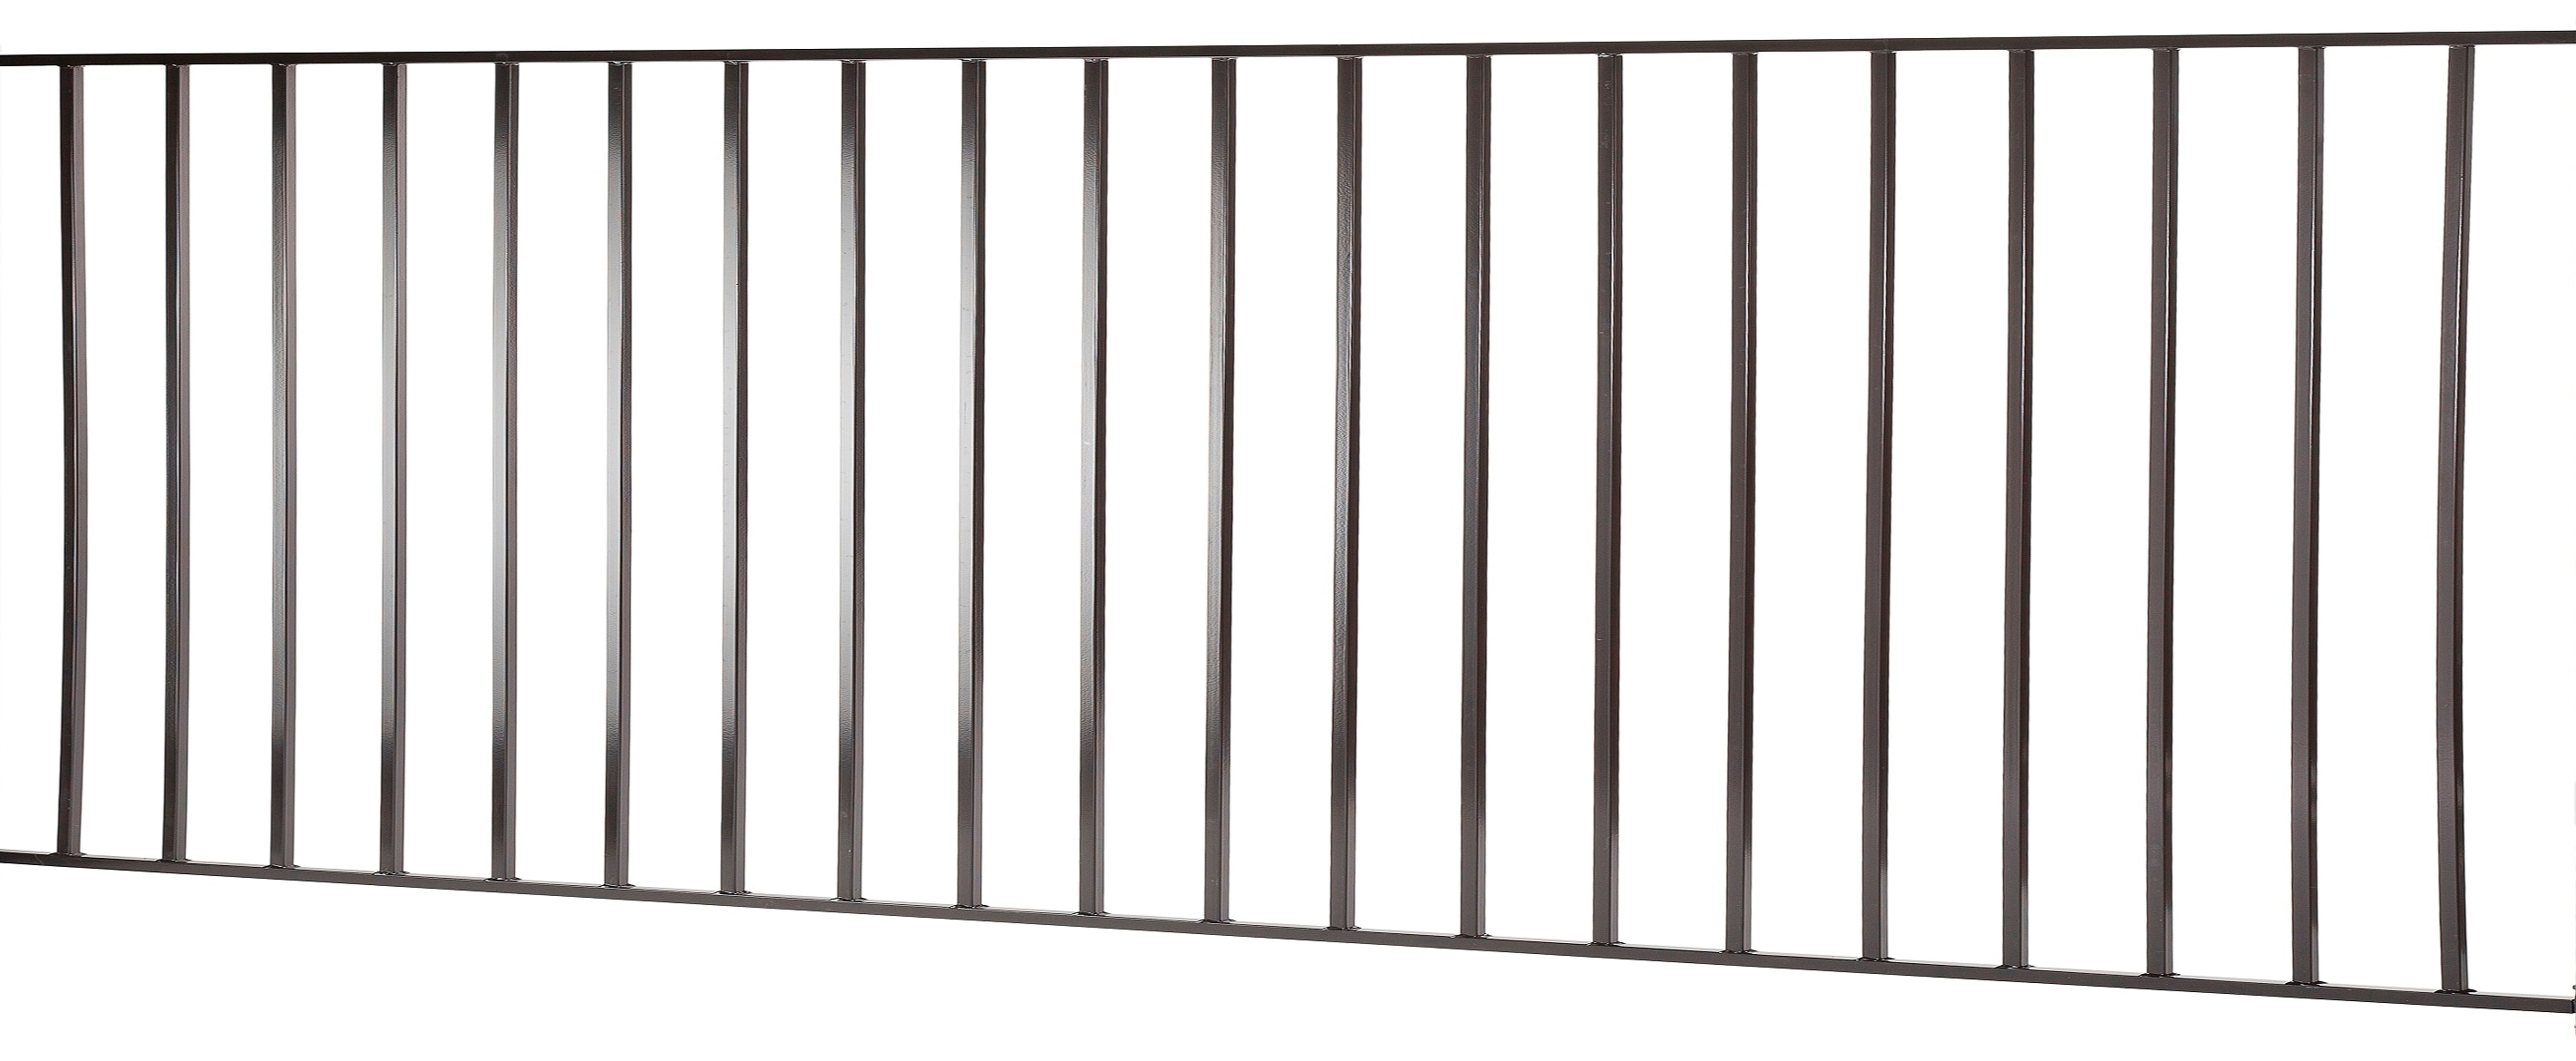 Monroe 3-ft H x 8-ft W Black Steel Flat-Top Yard Fence Panel in the ...